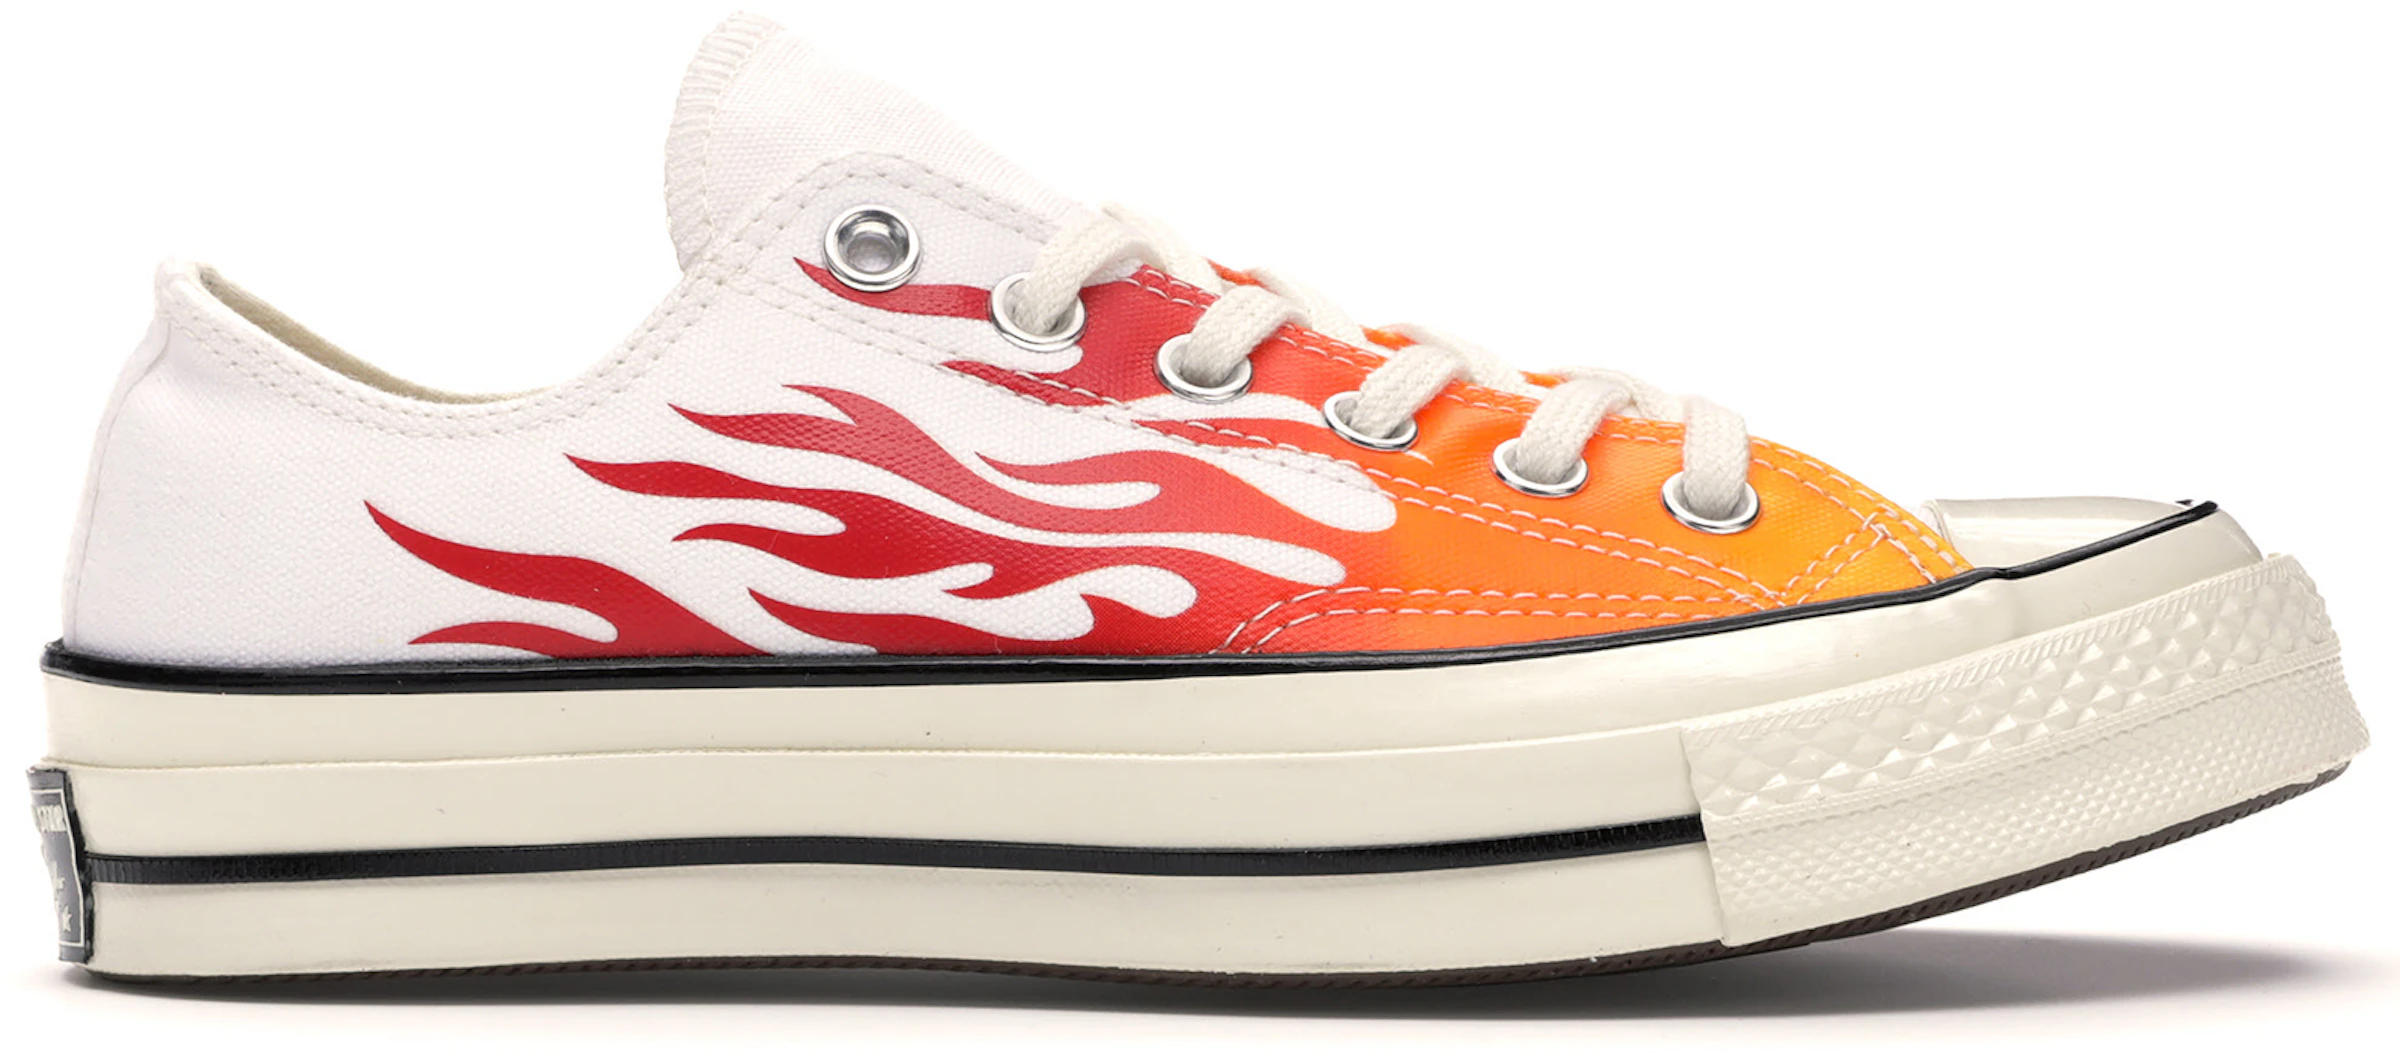 Taylor All-Star 70 Ox Archive Print Flames - ES